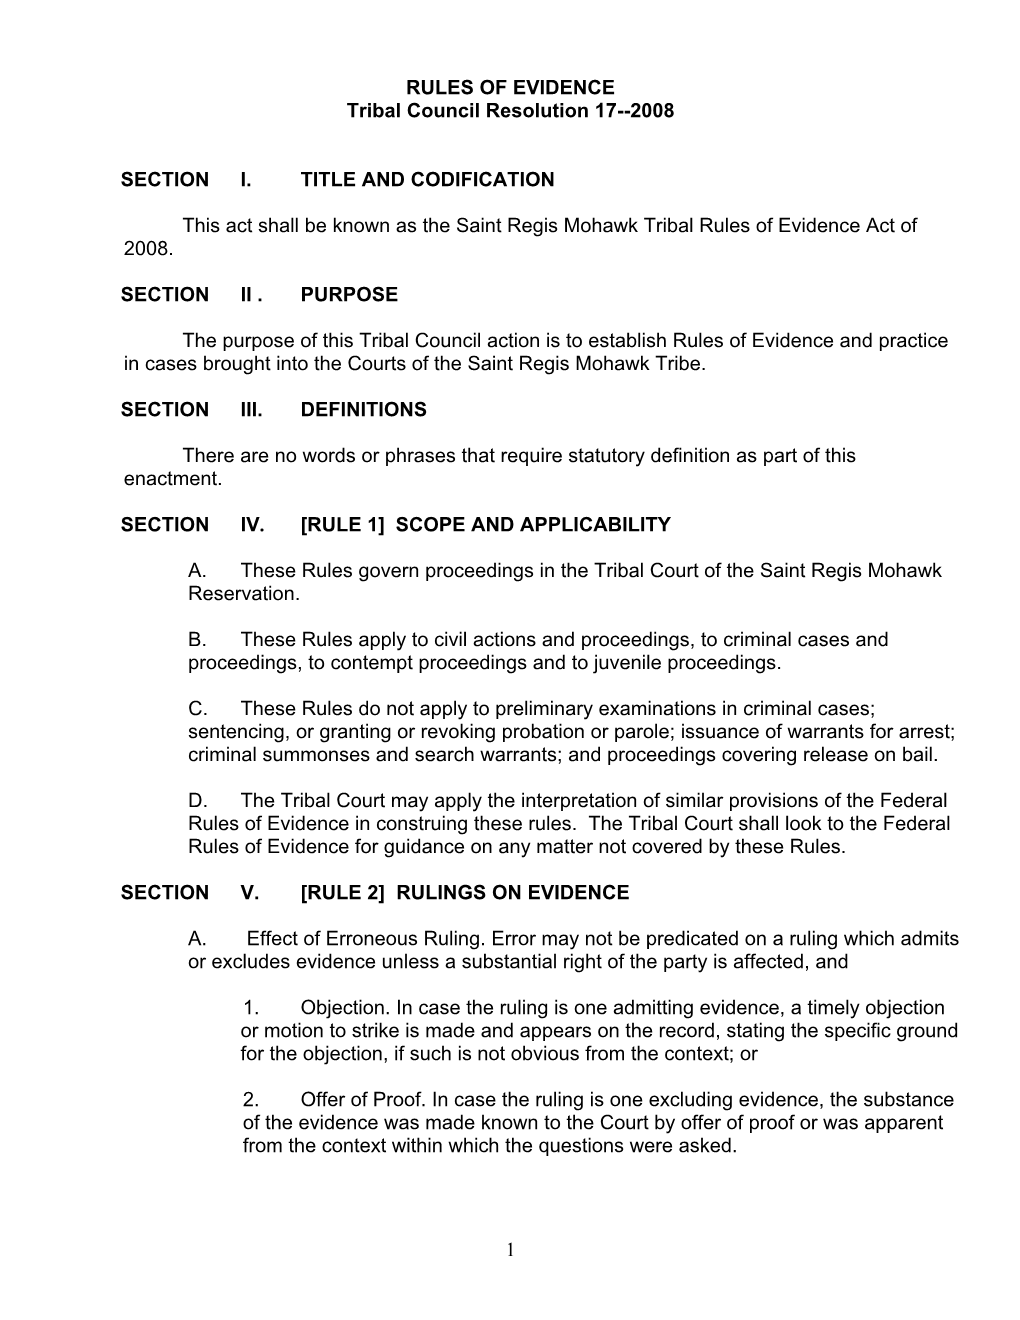 Tribal Rules of Evidence Act of 2008